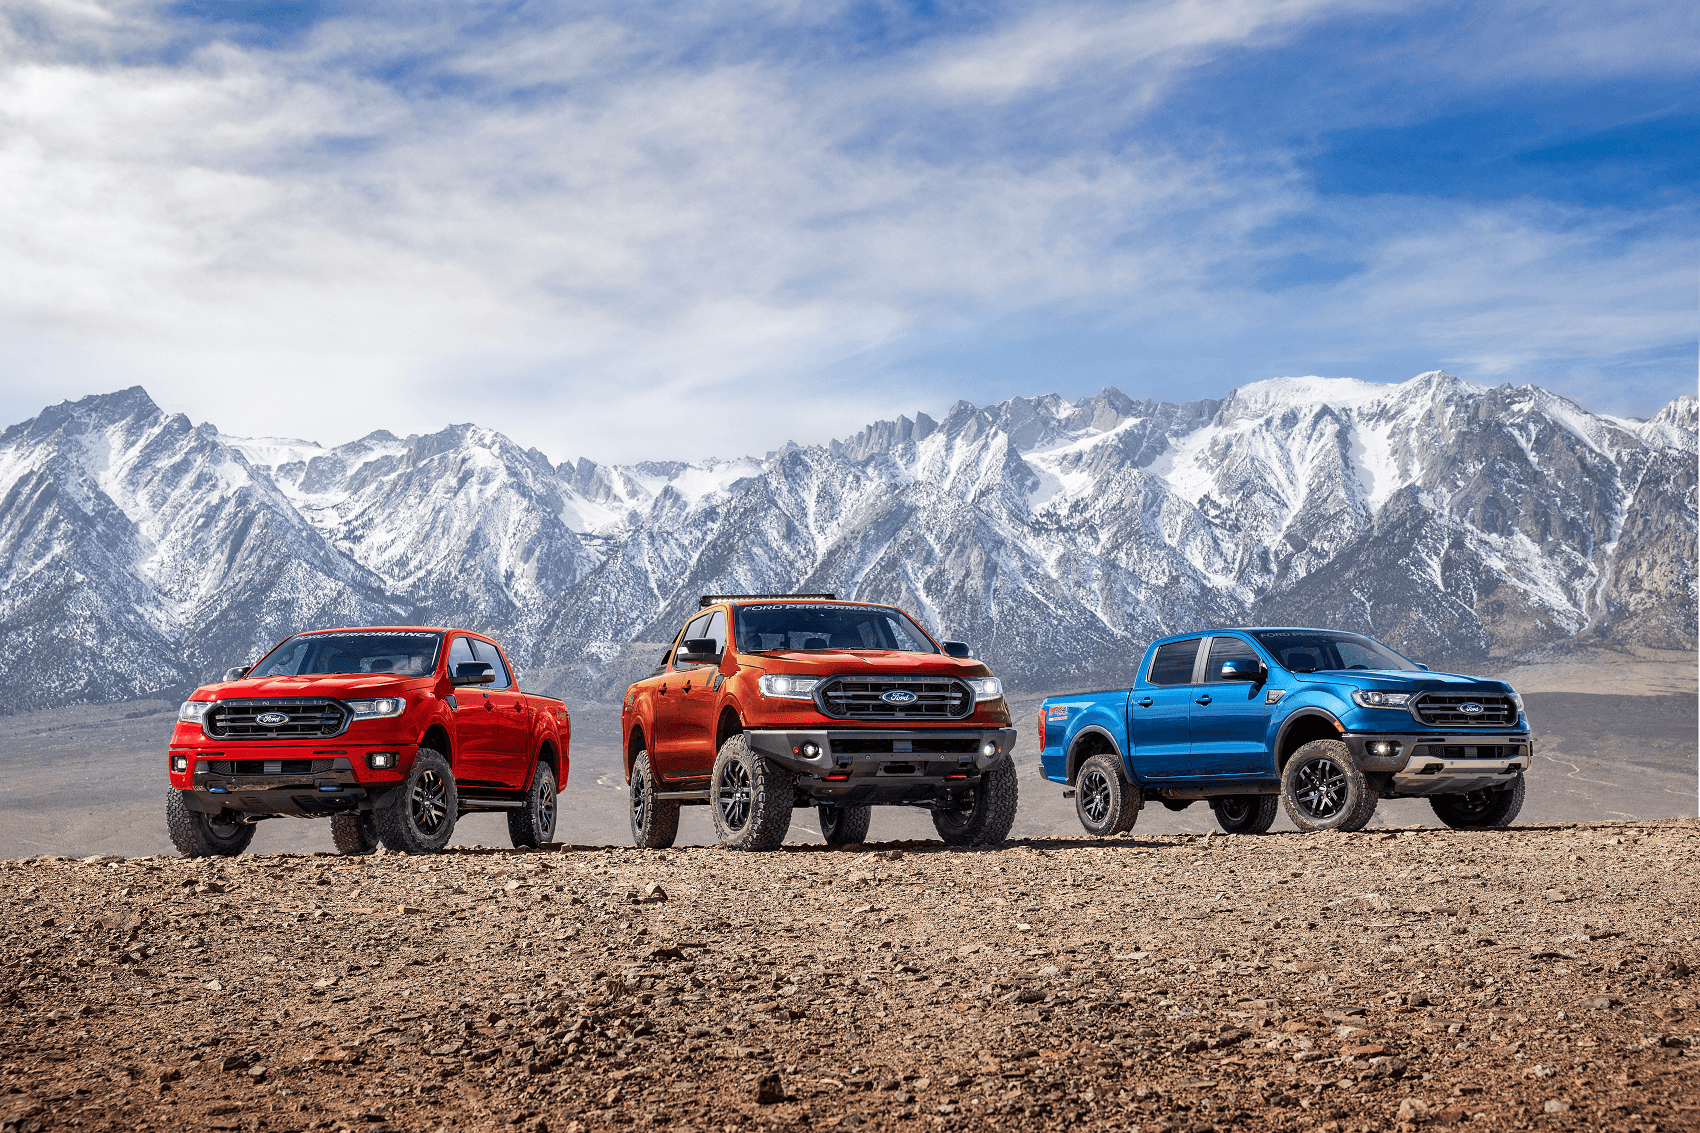 Ford Rangers in red, orange, and blue parked in front of a mountain chain